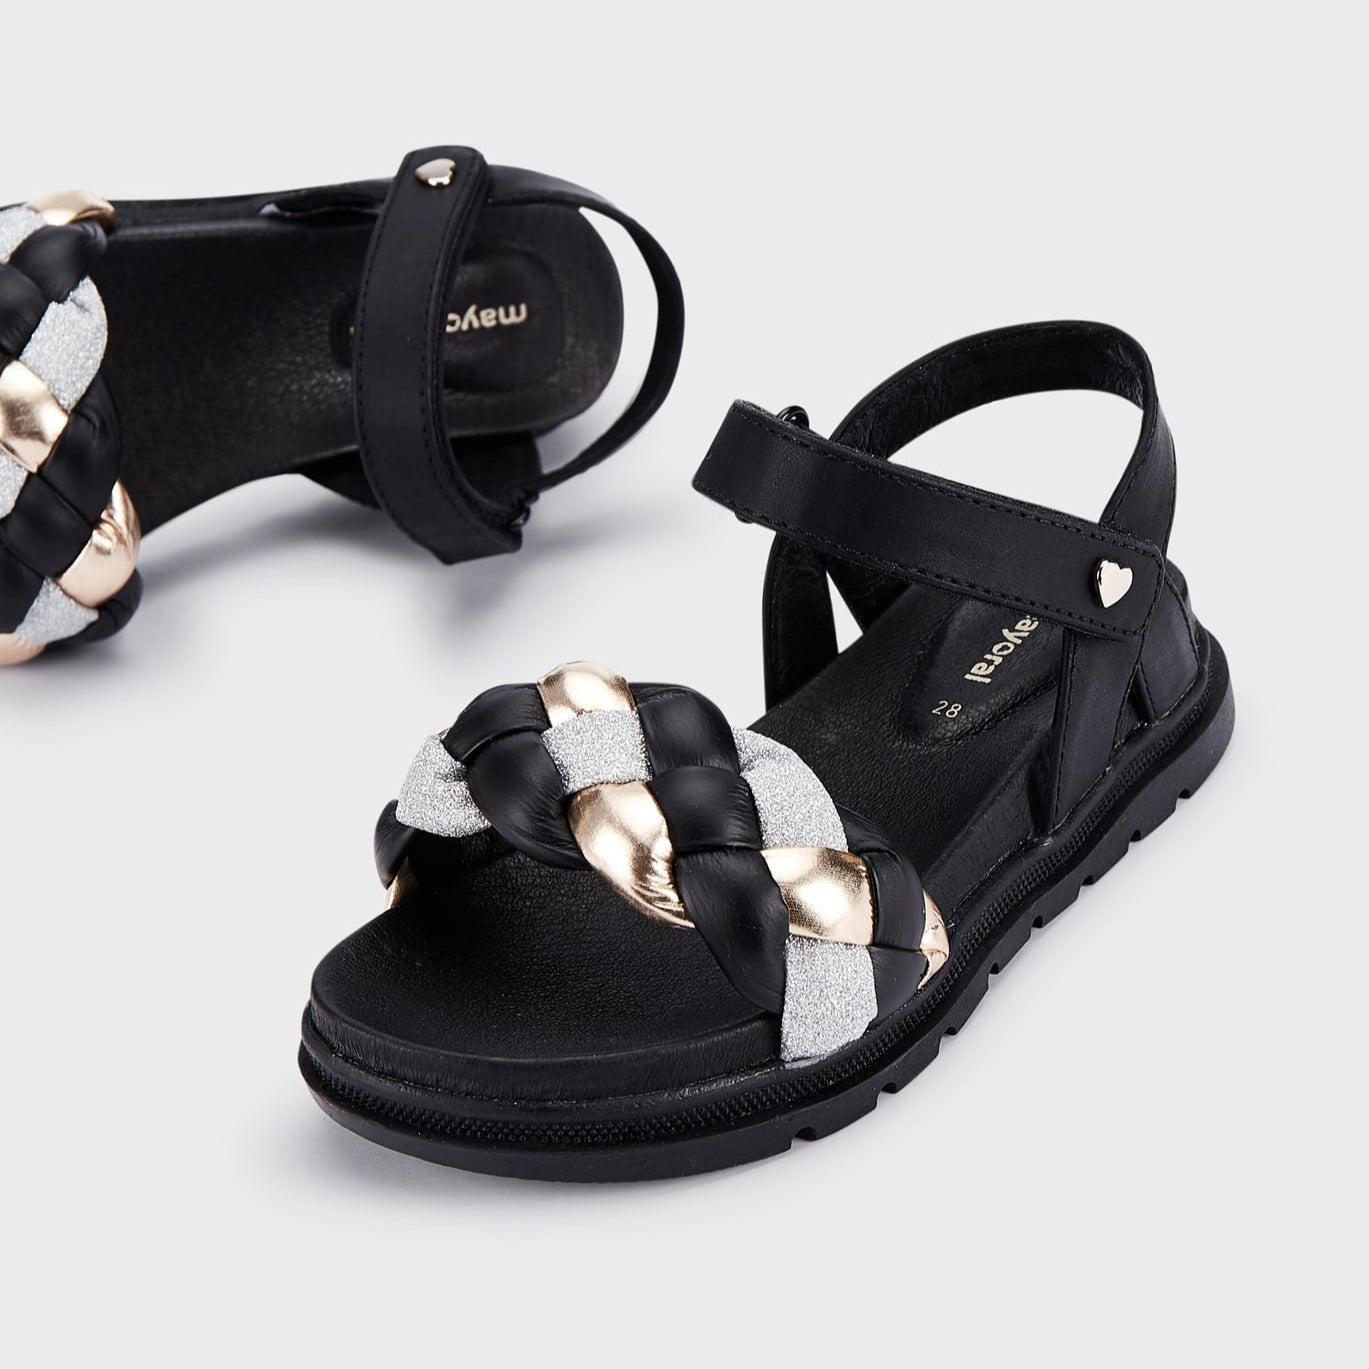 Mayoral Strapped Leather Sandals w/Braided Band Black_45453-035